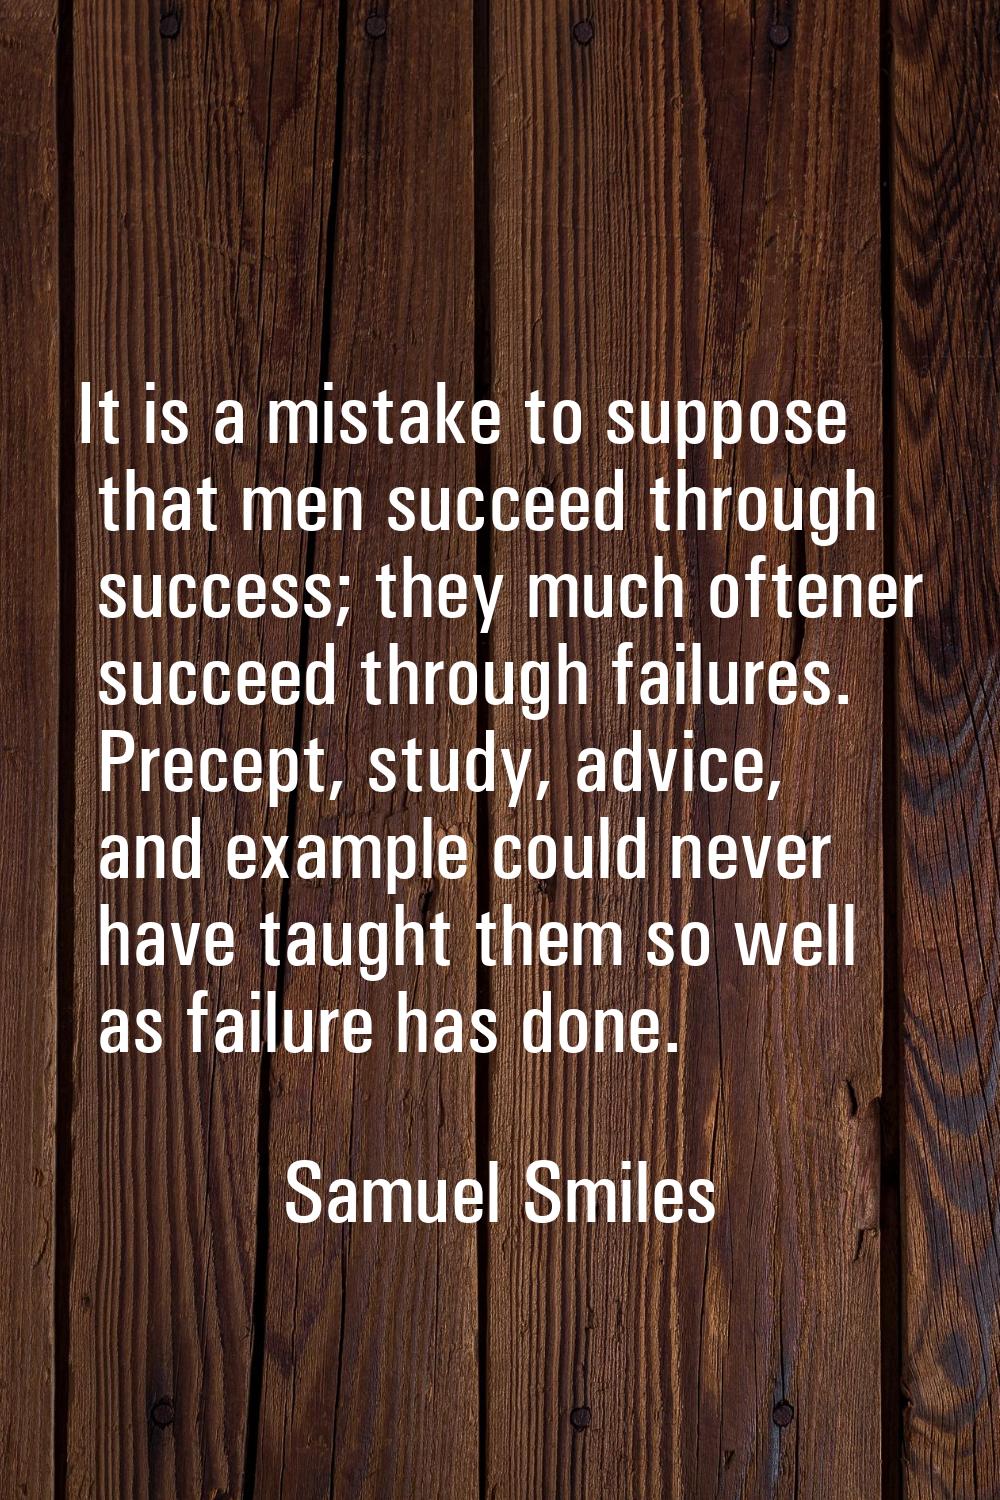 It is a mistake to suppose that men succeed through success; they much oftener succeed through fail